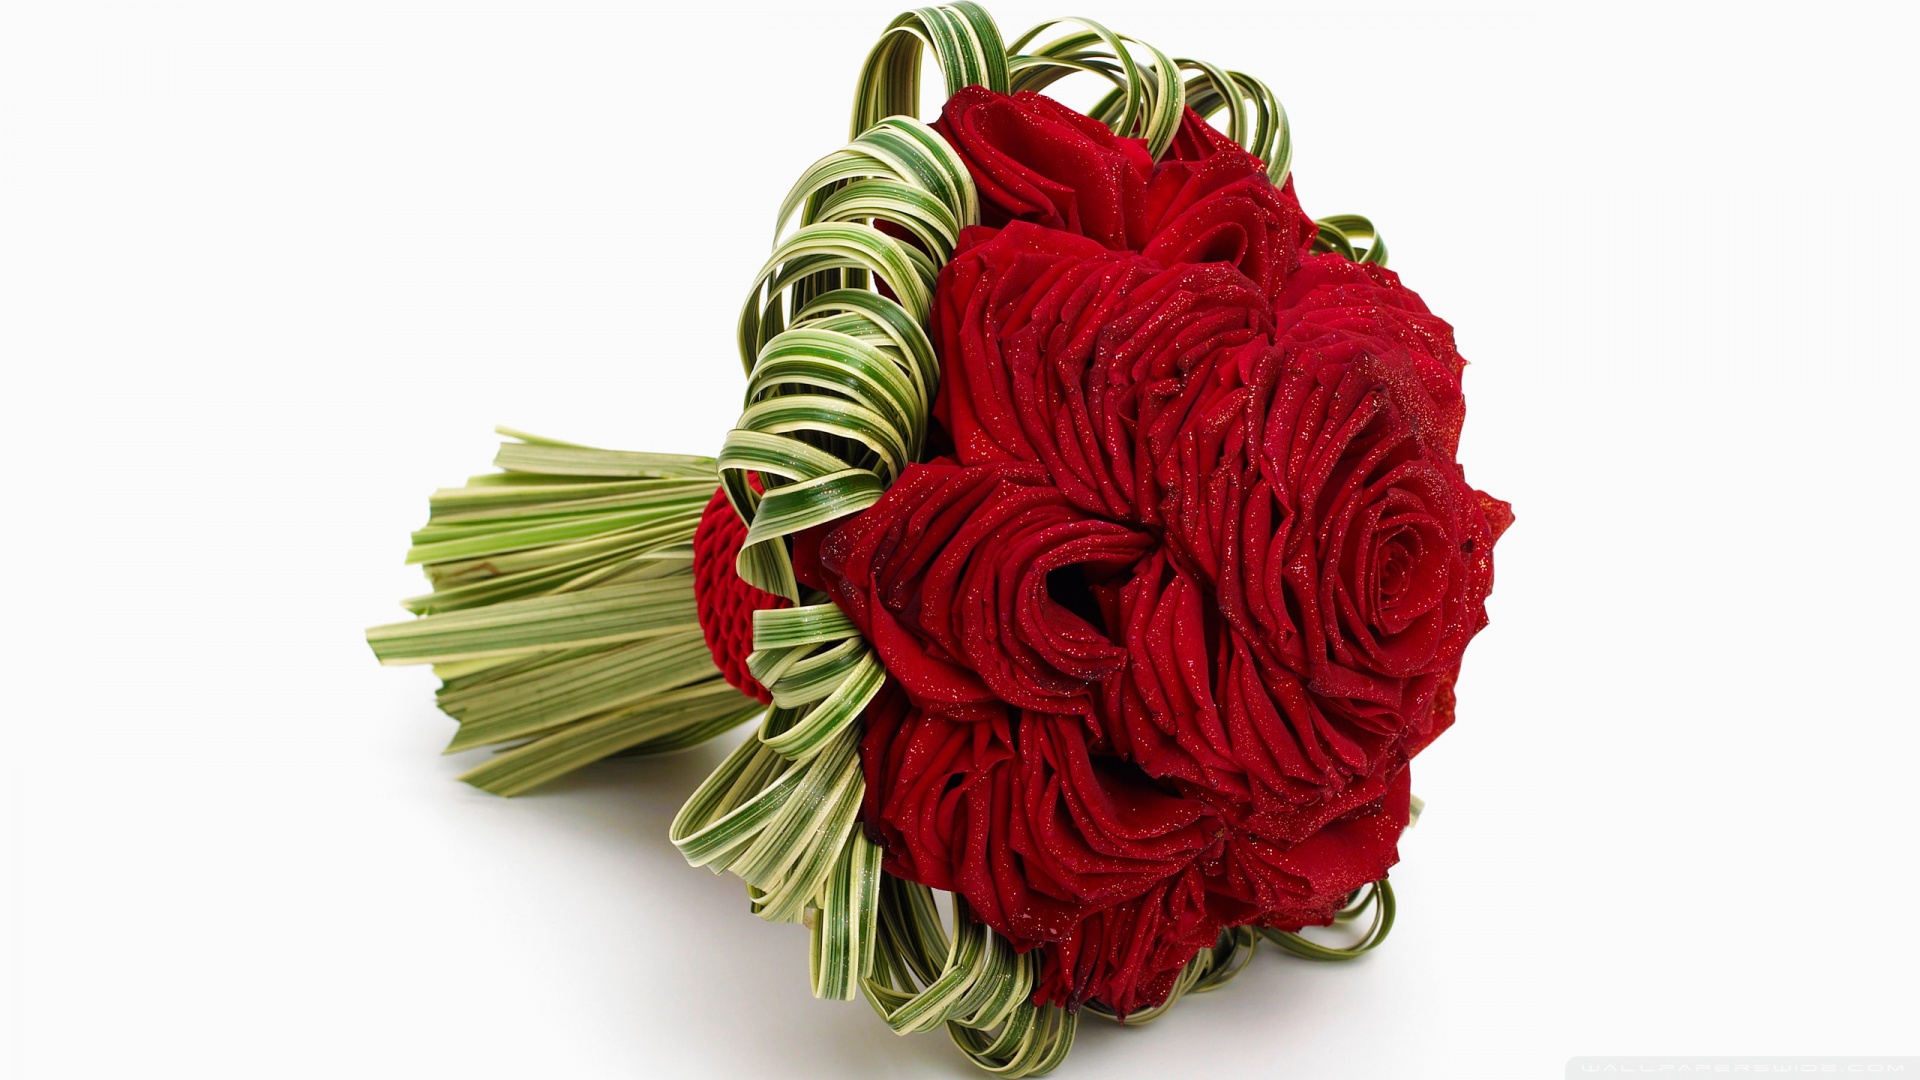 Red roses in a beautiful wedding bouquet wallpapers and ...